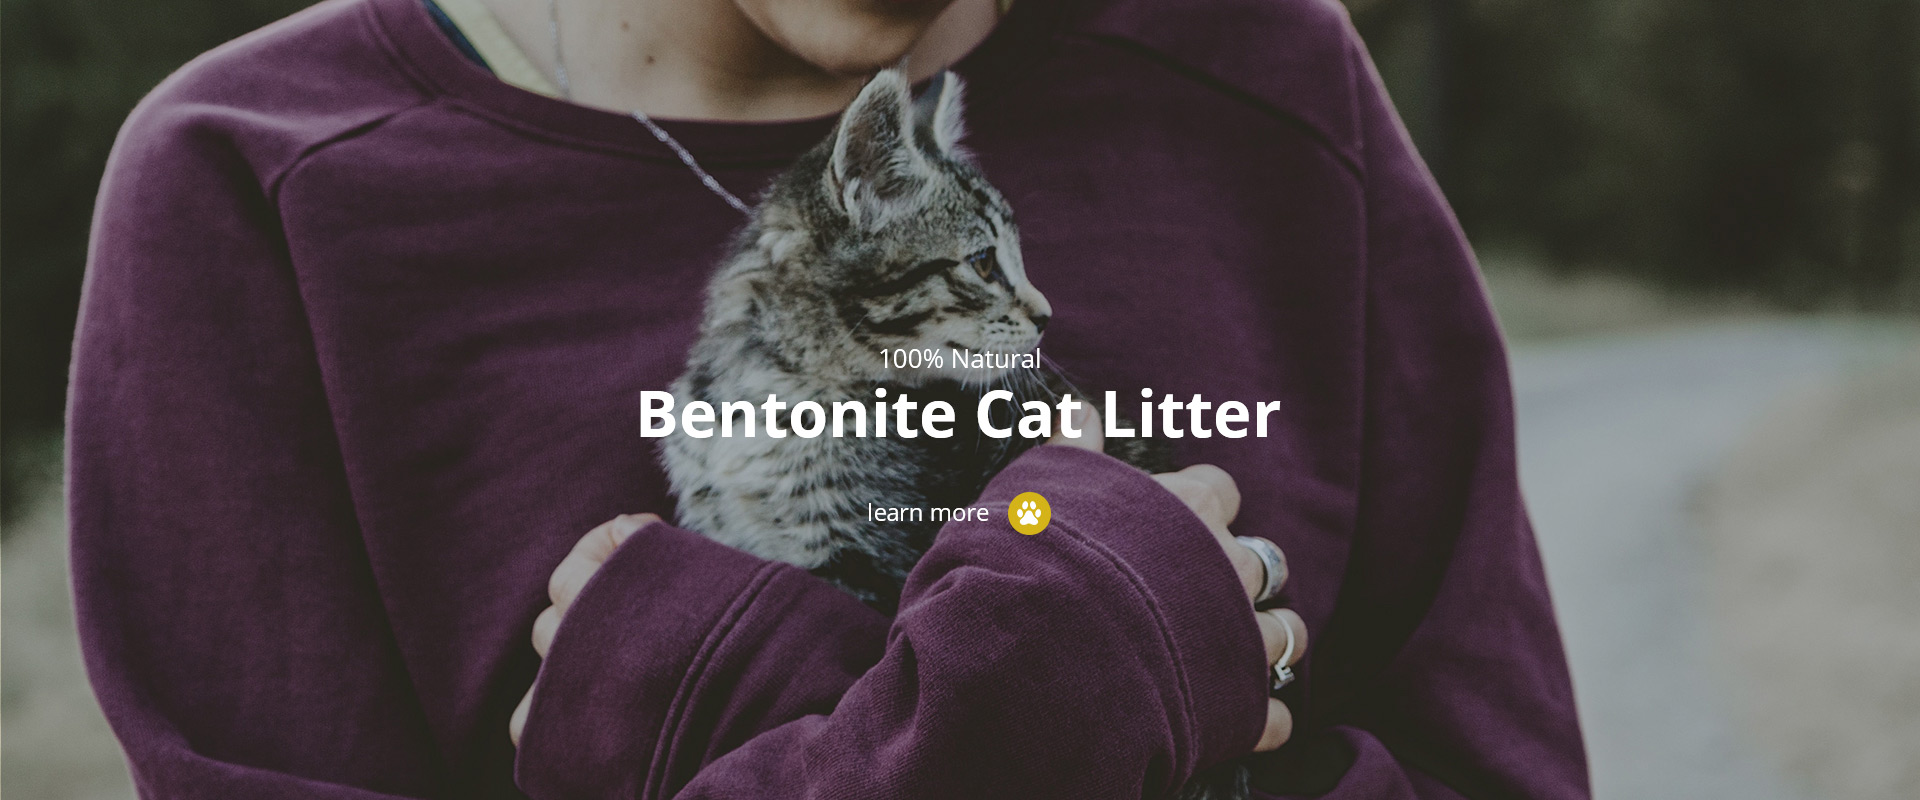 How to choose the best cat litter?